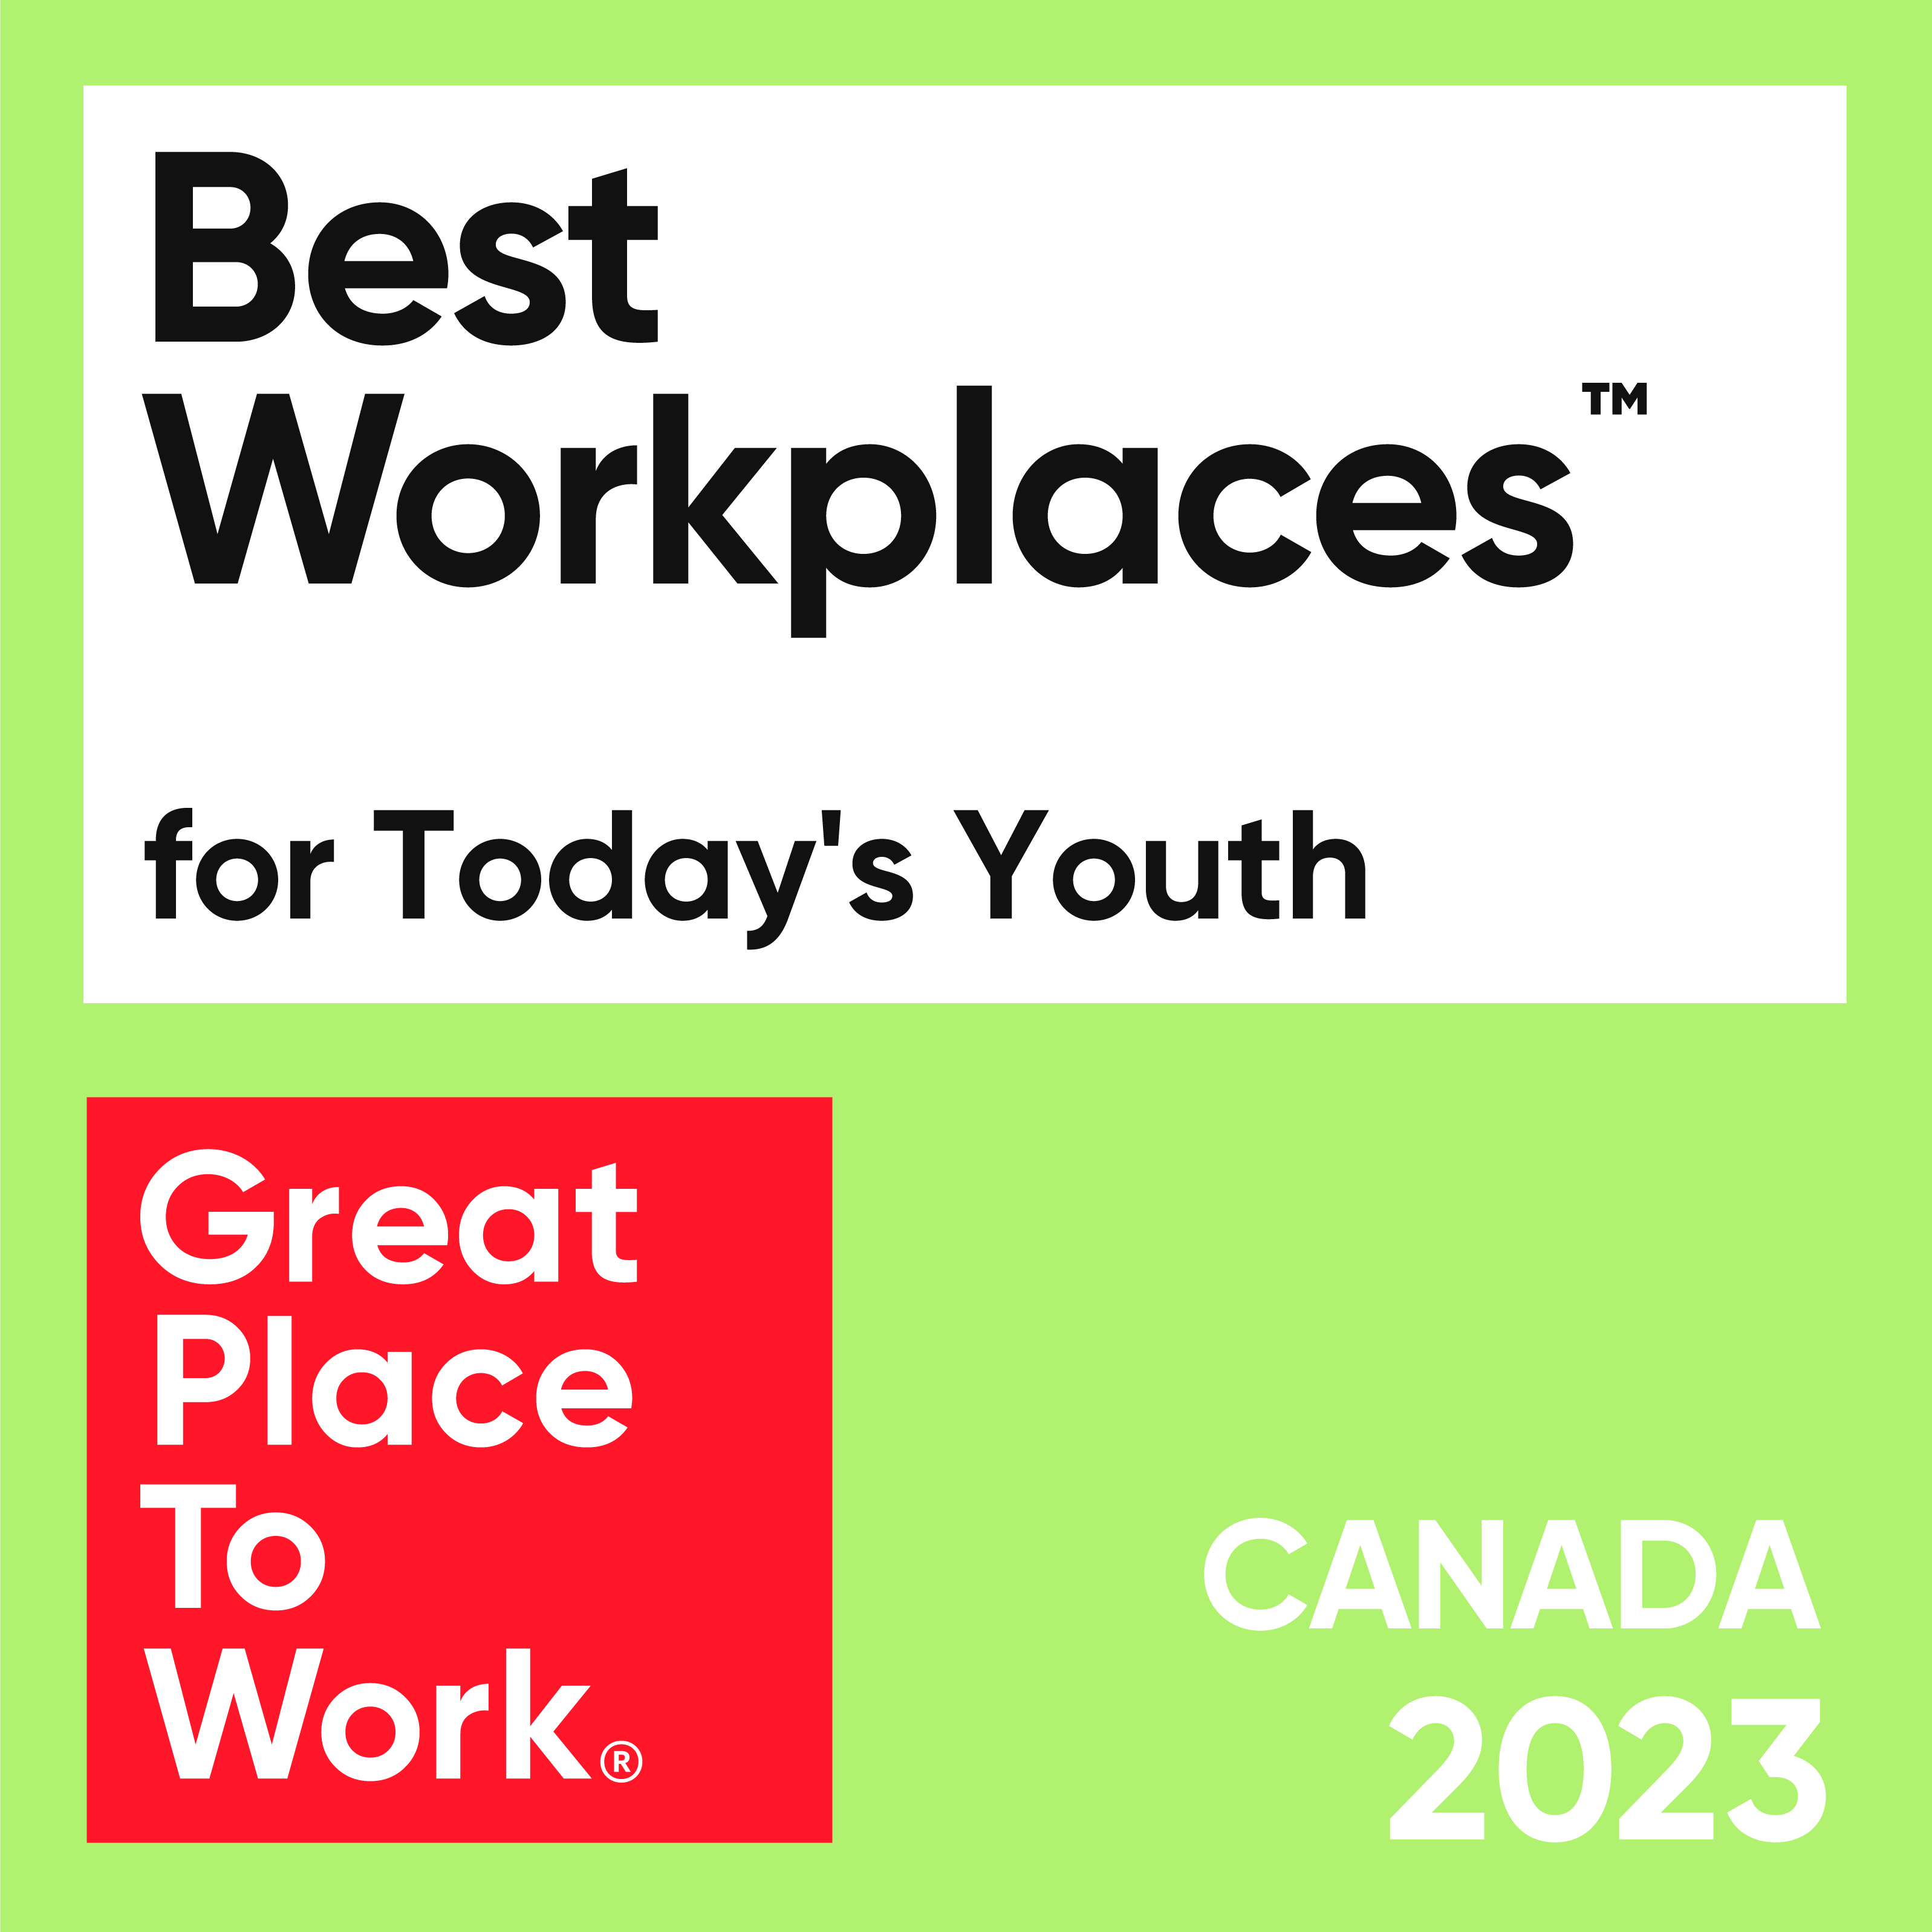 Best Workplaces for Today's Youth 2023